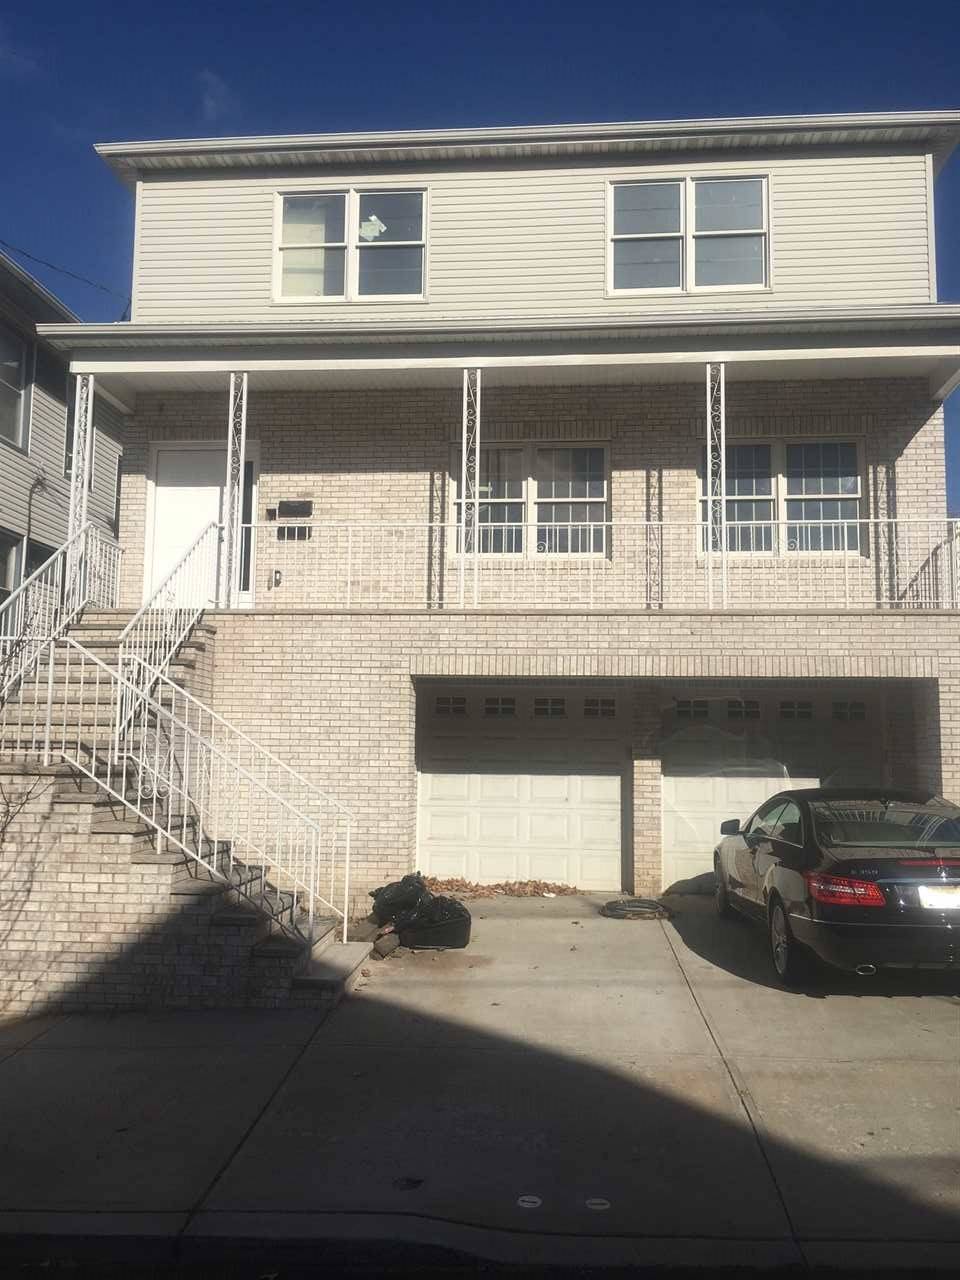 NO FEE - 3 BR New Jersey